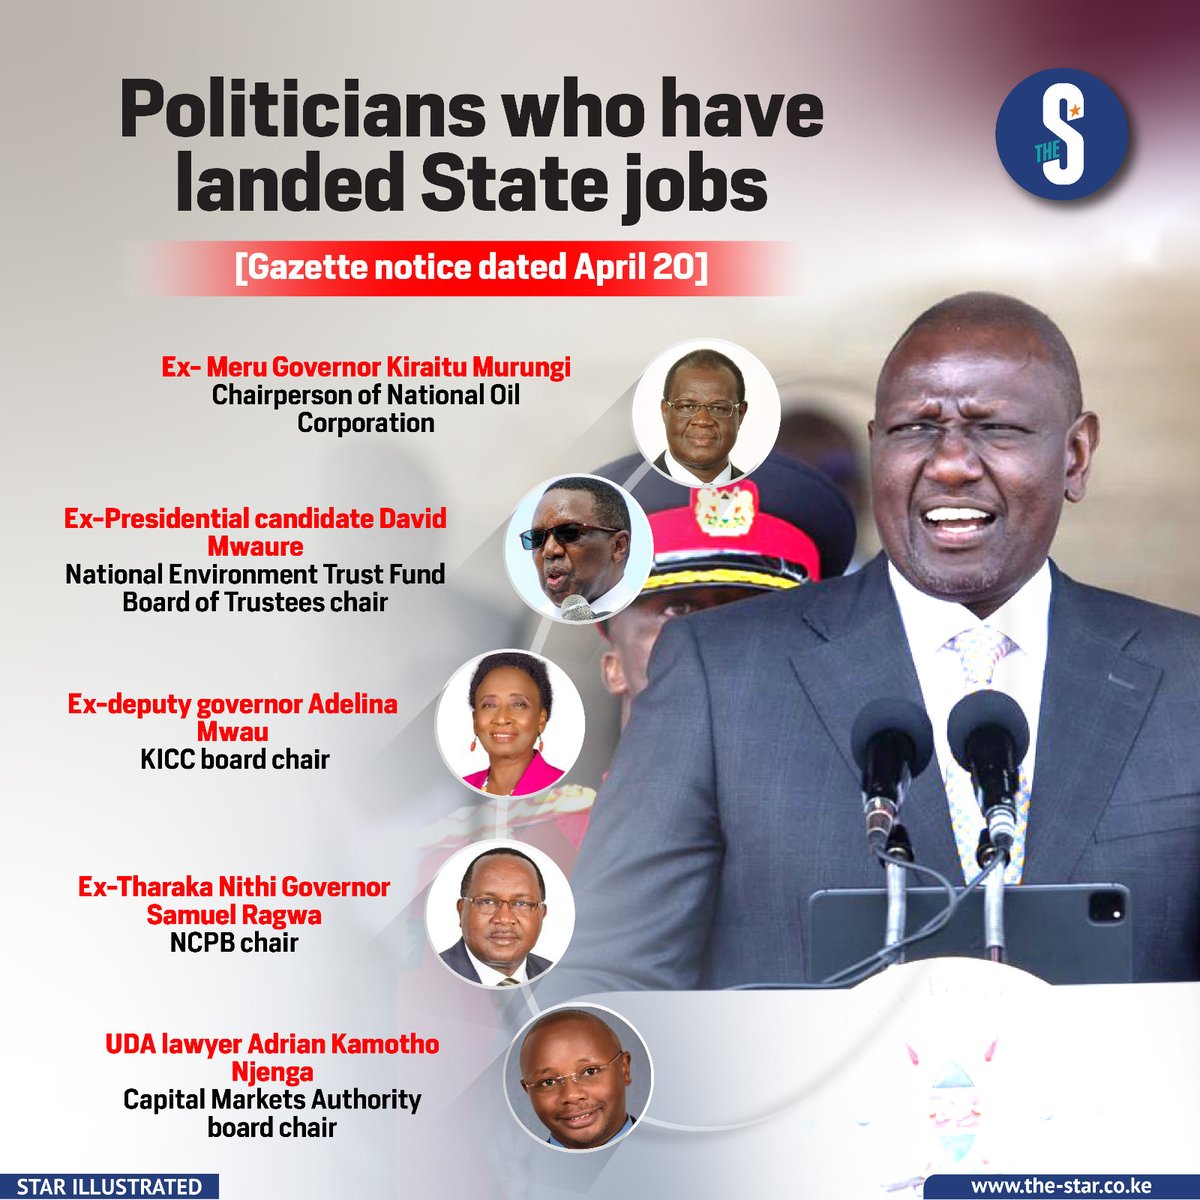 TheStarKenya: President William Ruto has continued to reward individuals with state appointments.

#StarInfographics